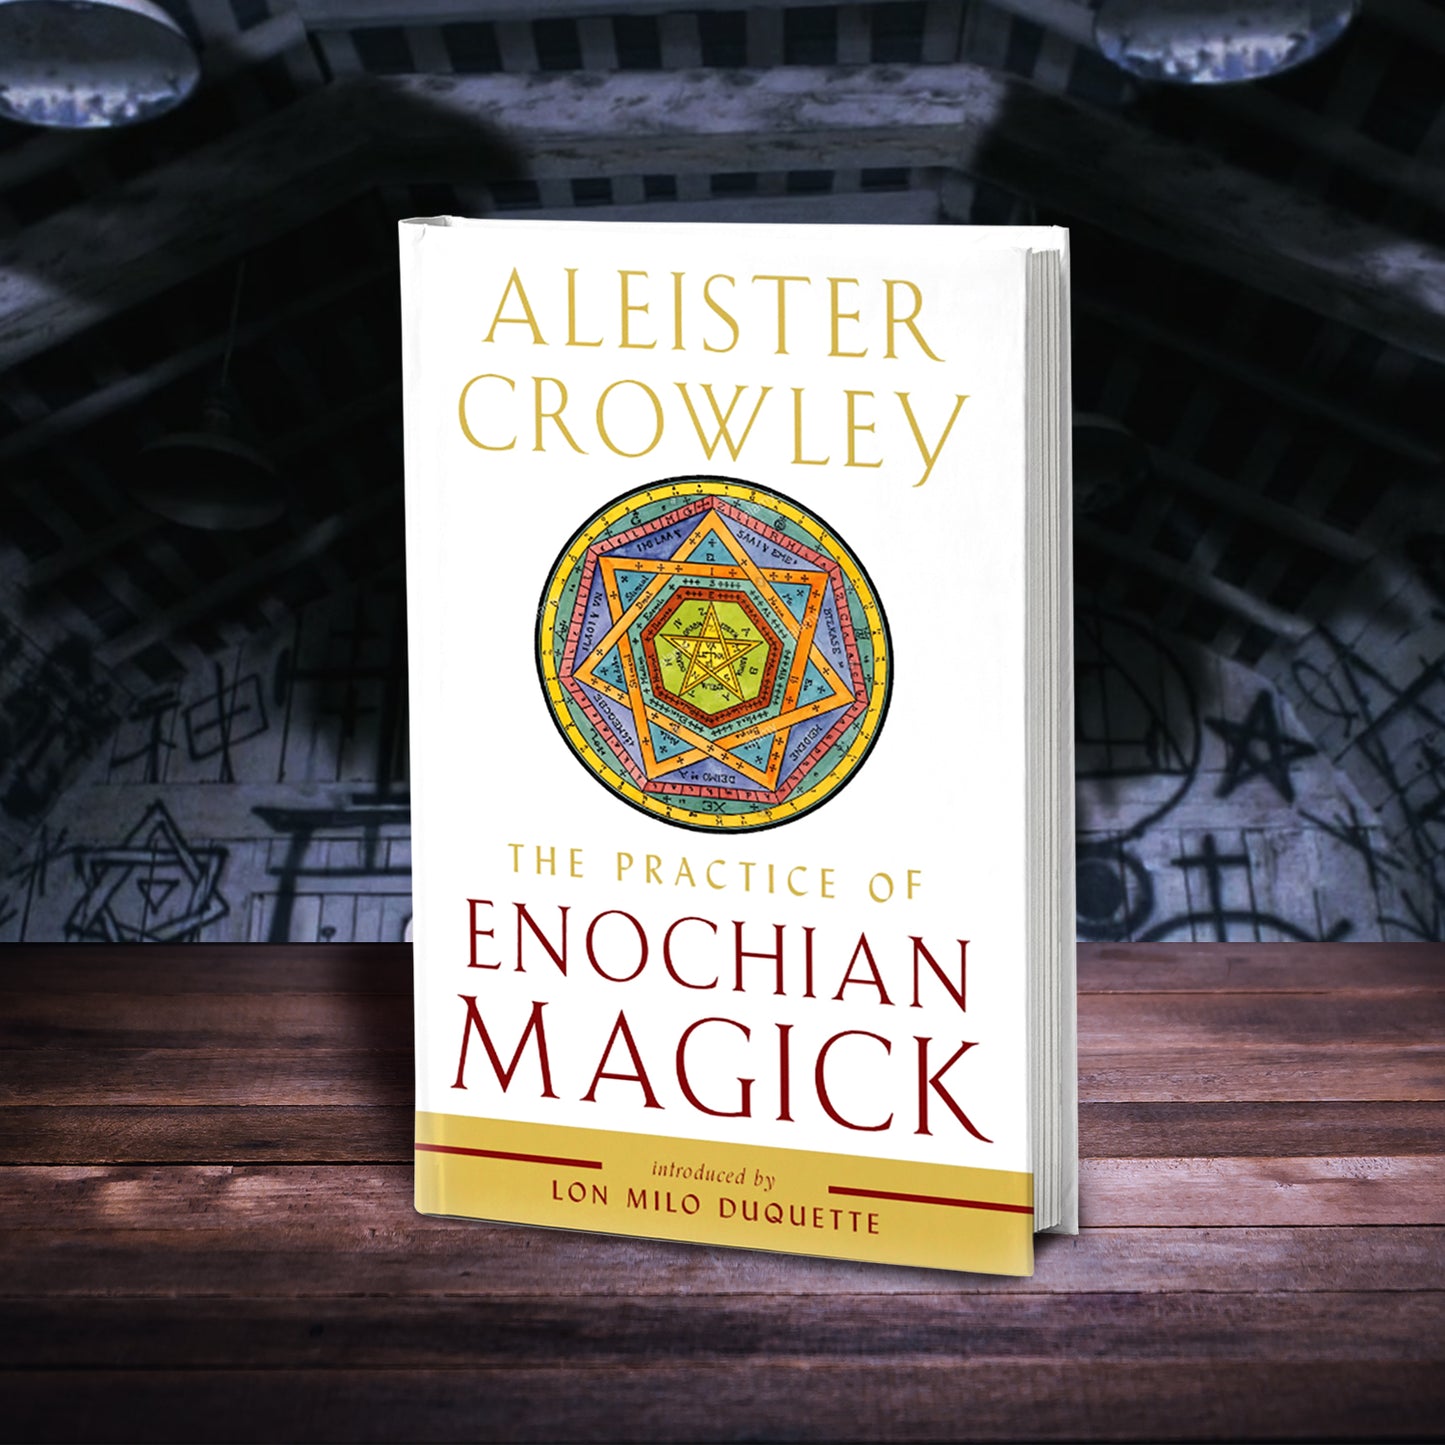 Load image into Gallery viewer, A white book on a wood table, set against a wall covered in magical symbols. At the top of the book in yellow text is the author&amp;#39;s name, Aleister Crowley. Under the name is a muilti-colored Enochian symbol, consisting of a six point star set within concentric circles. Under the symbol in yellow text is the title &amp;quot;The practice of Enochian Magick.&amp;quot; At the bottom of the cover is a yellow band, with red text reading &amp;quot;introduced by Lon Milo Duquette.&amp;quot;
